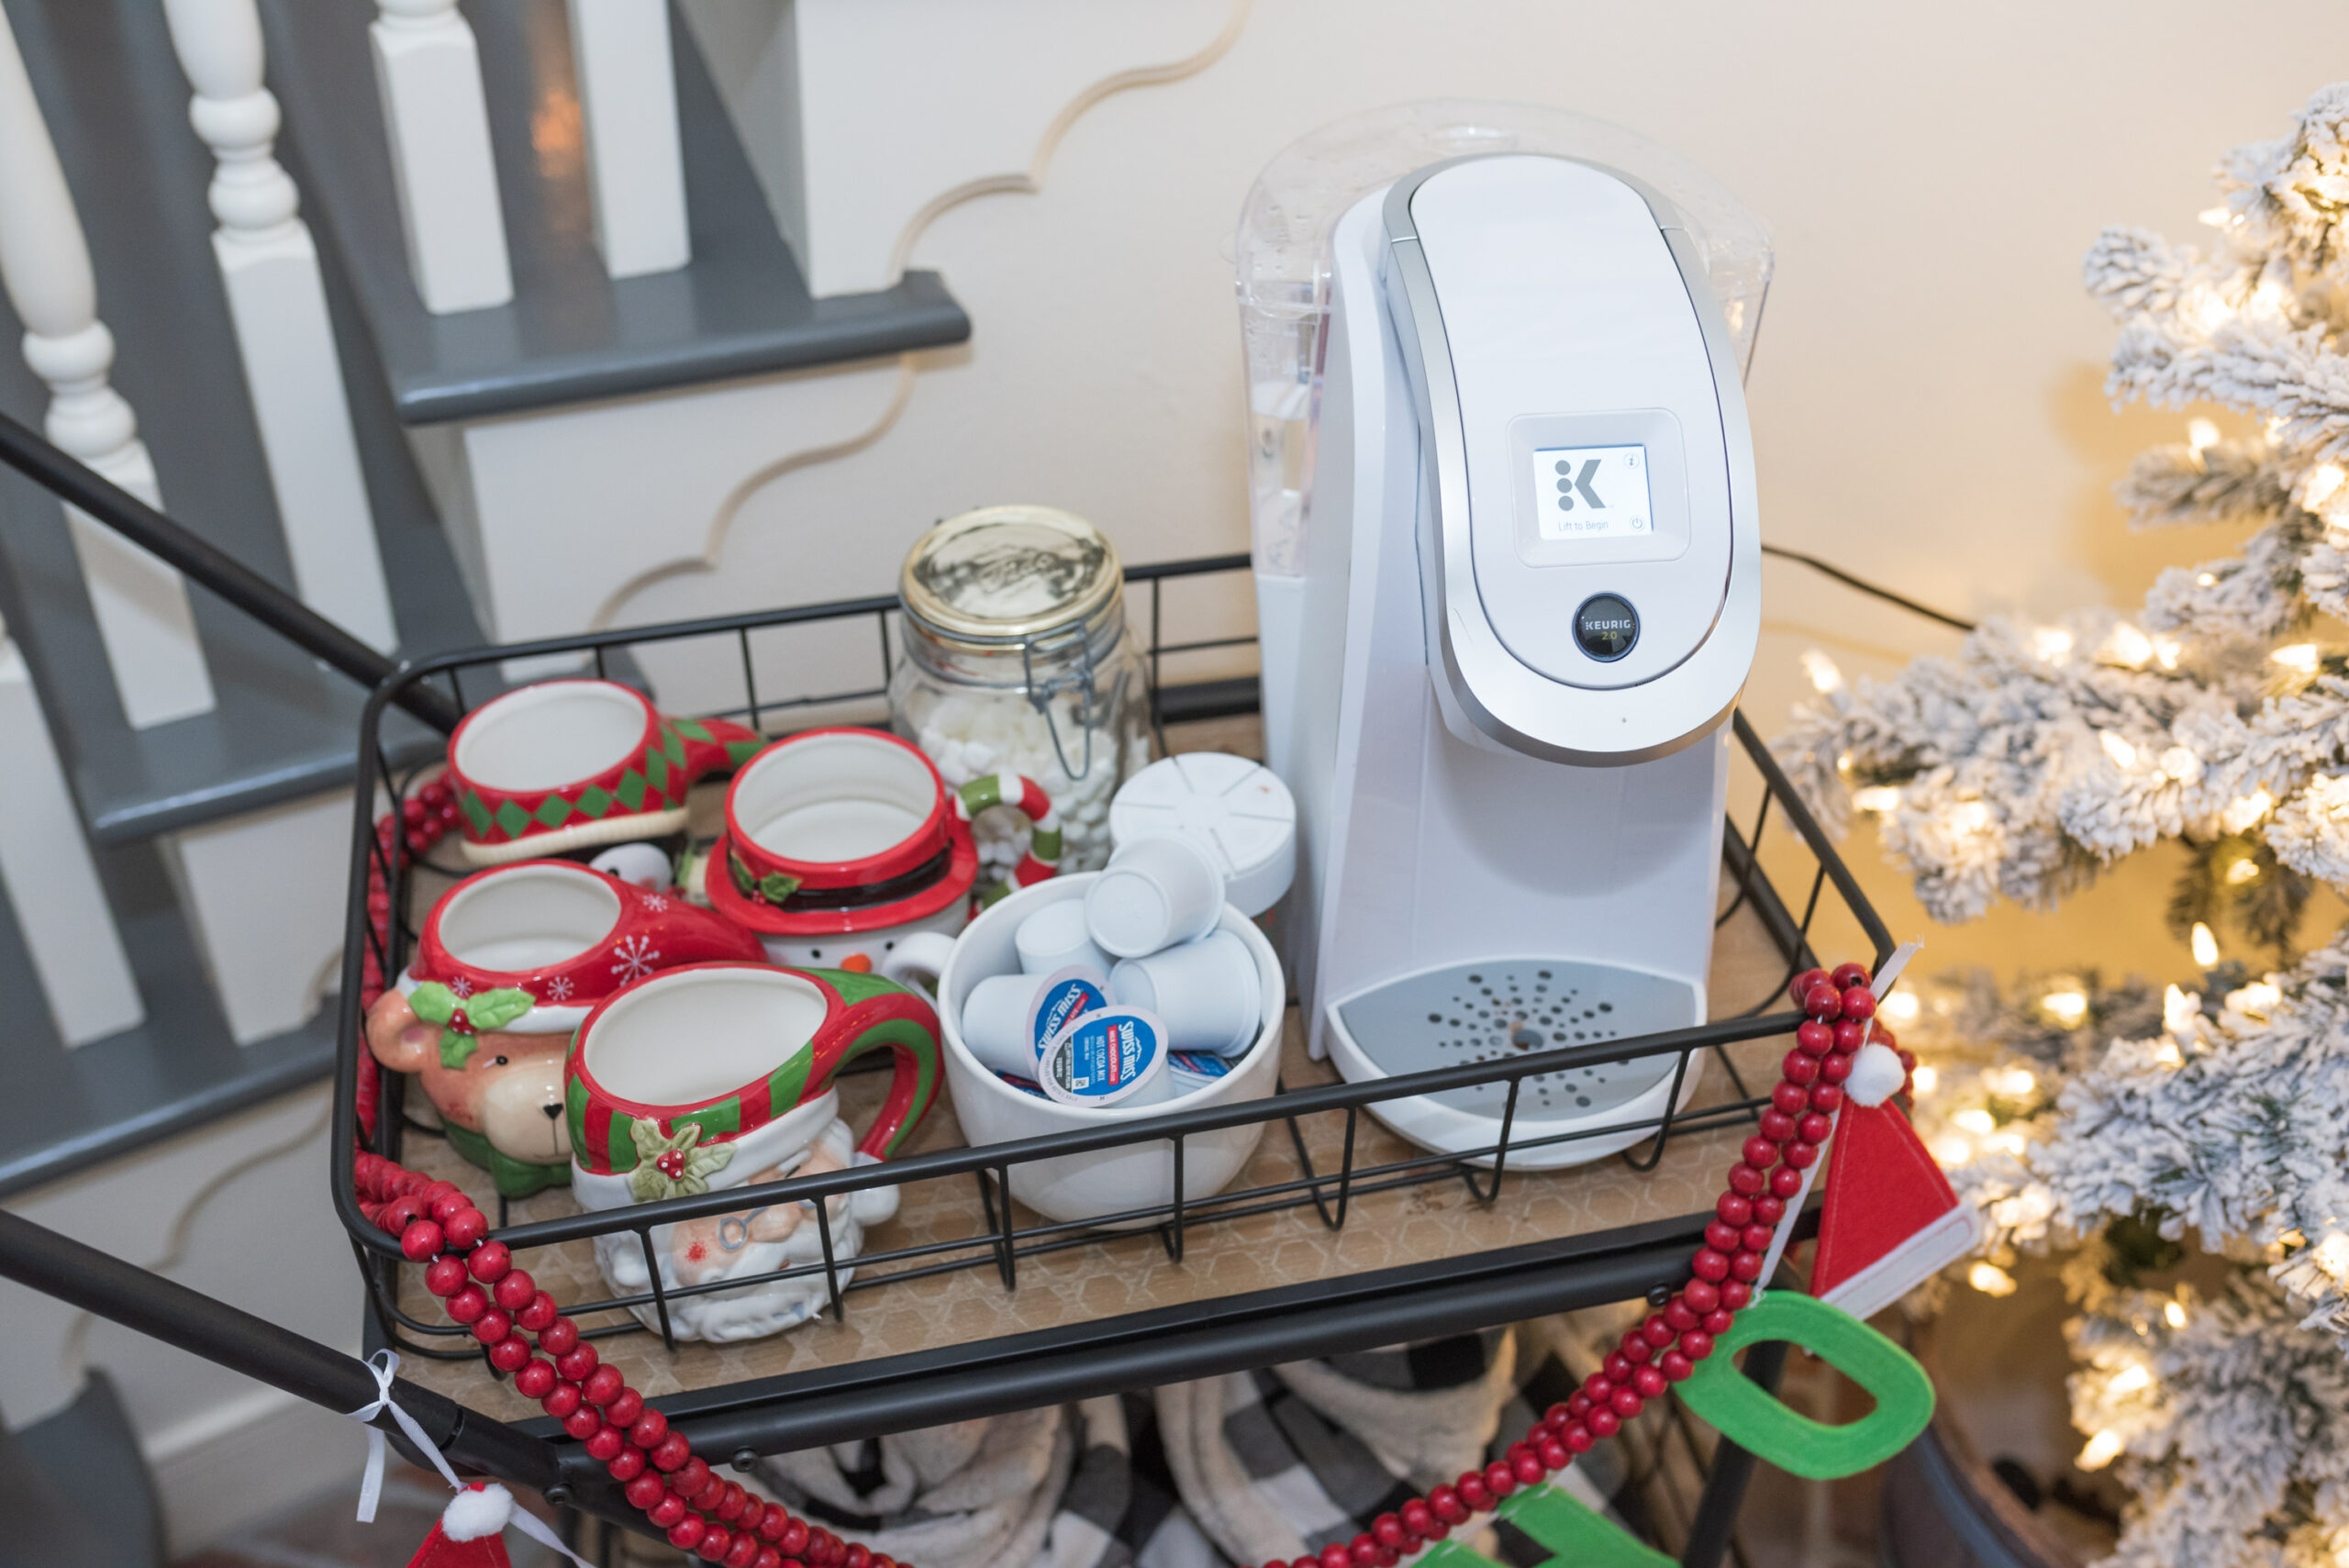 Hot Cocoa Bar by popular Houston lifestyle blog, Fancy Ashley: image of a black metal bar cart containing a Keurig, Christmas mugs, Christmas garland, mini marshmallows, and coco pods. 